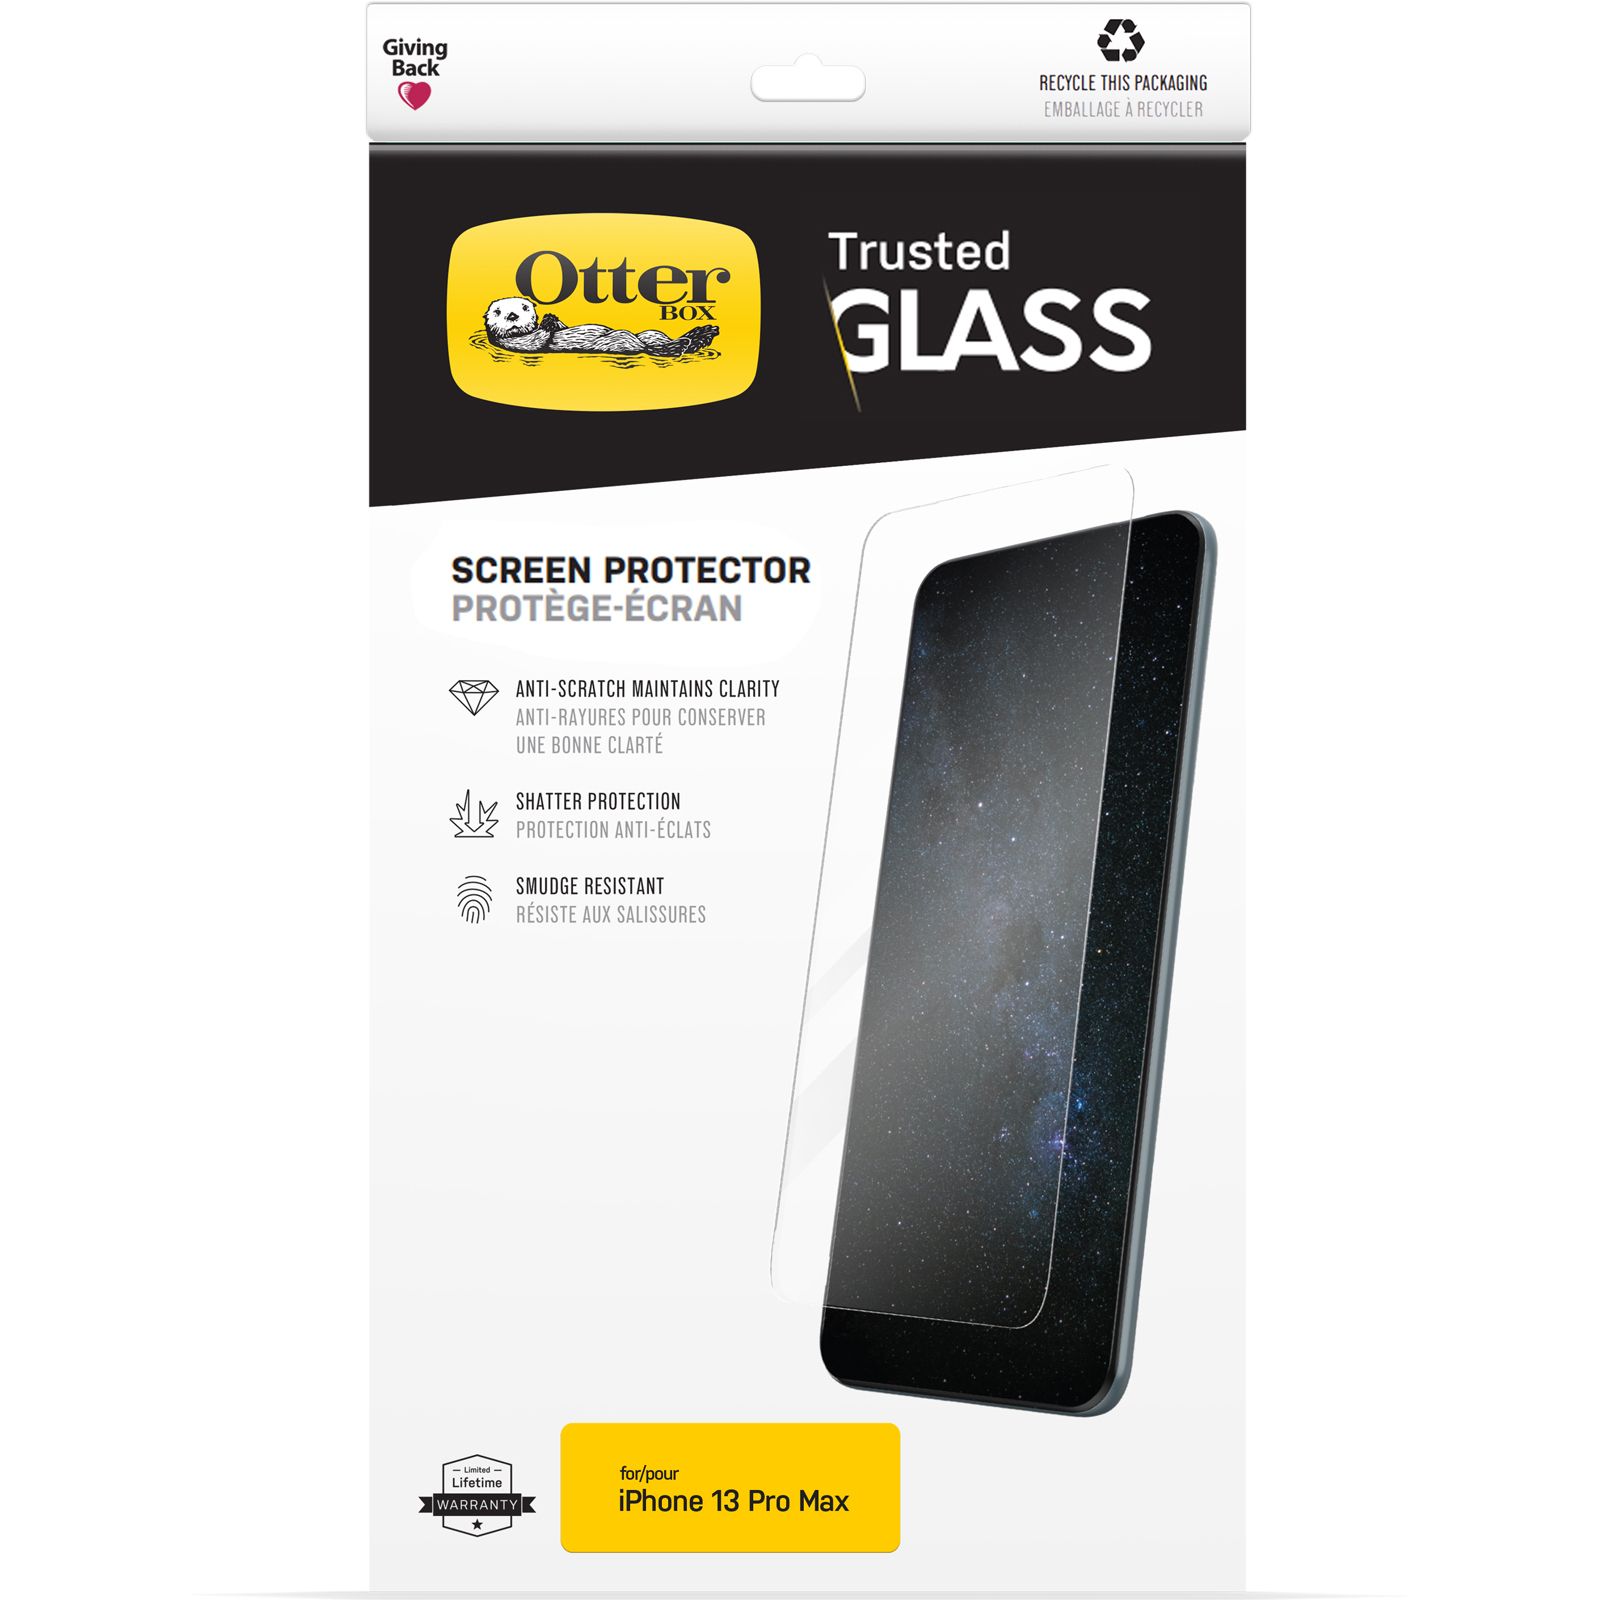 OtterBox iPhone 13 Pro Max Trusted Glass